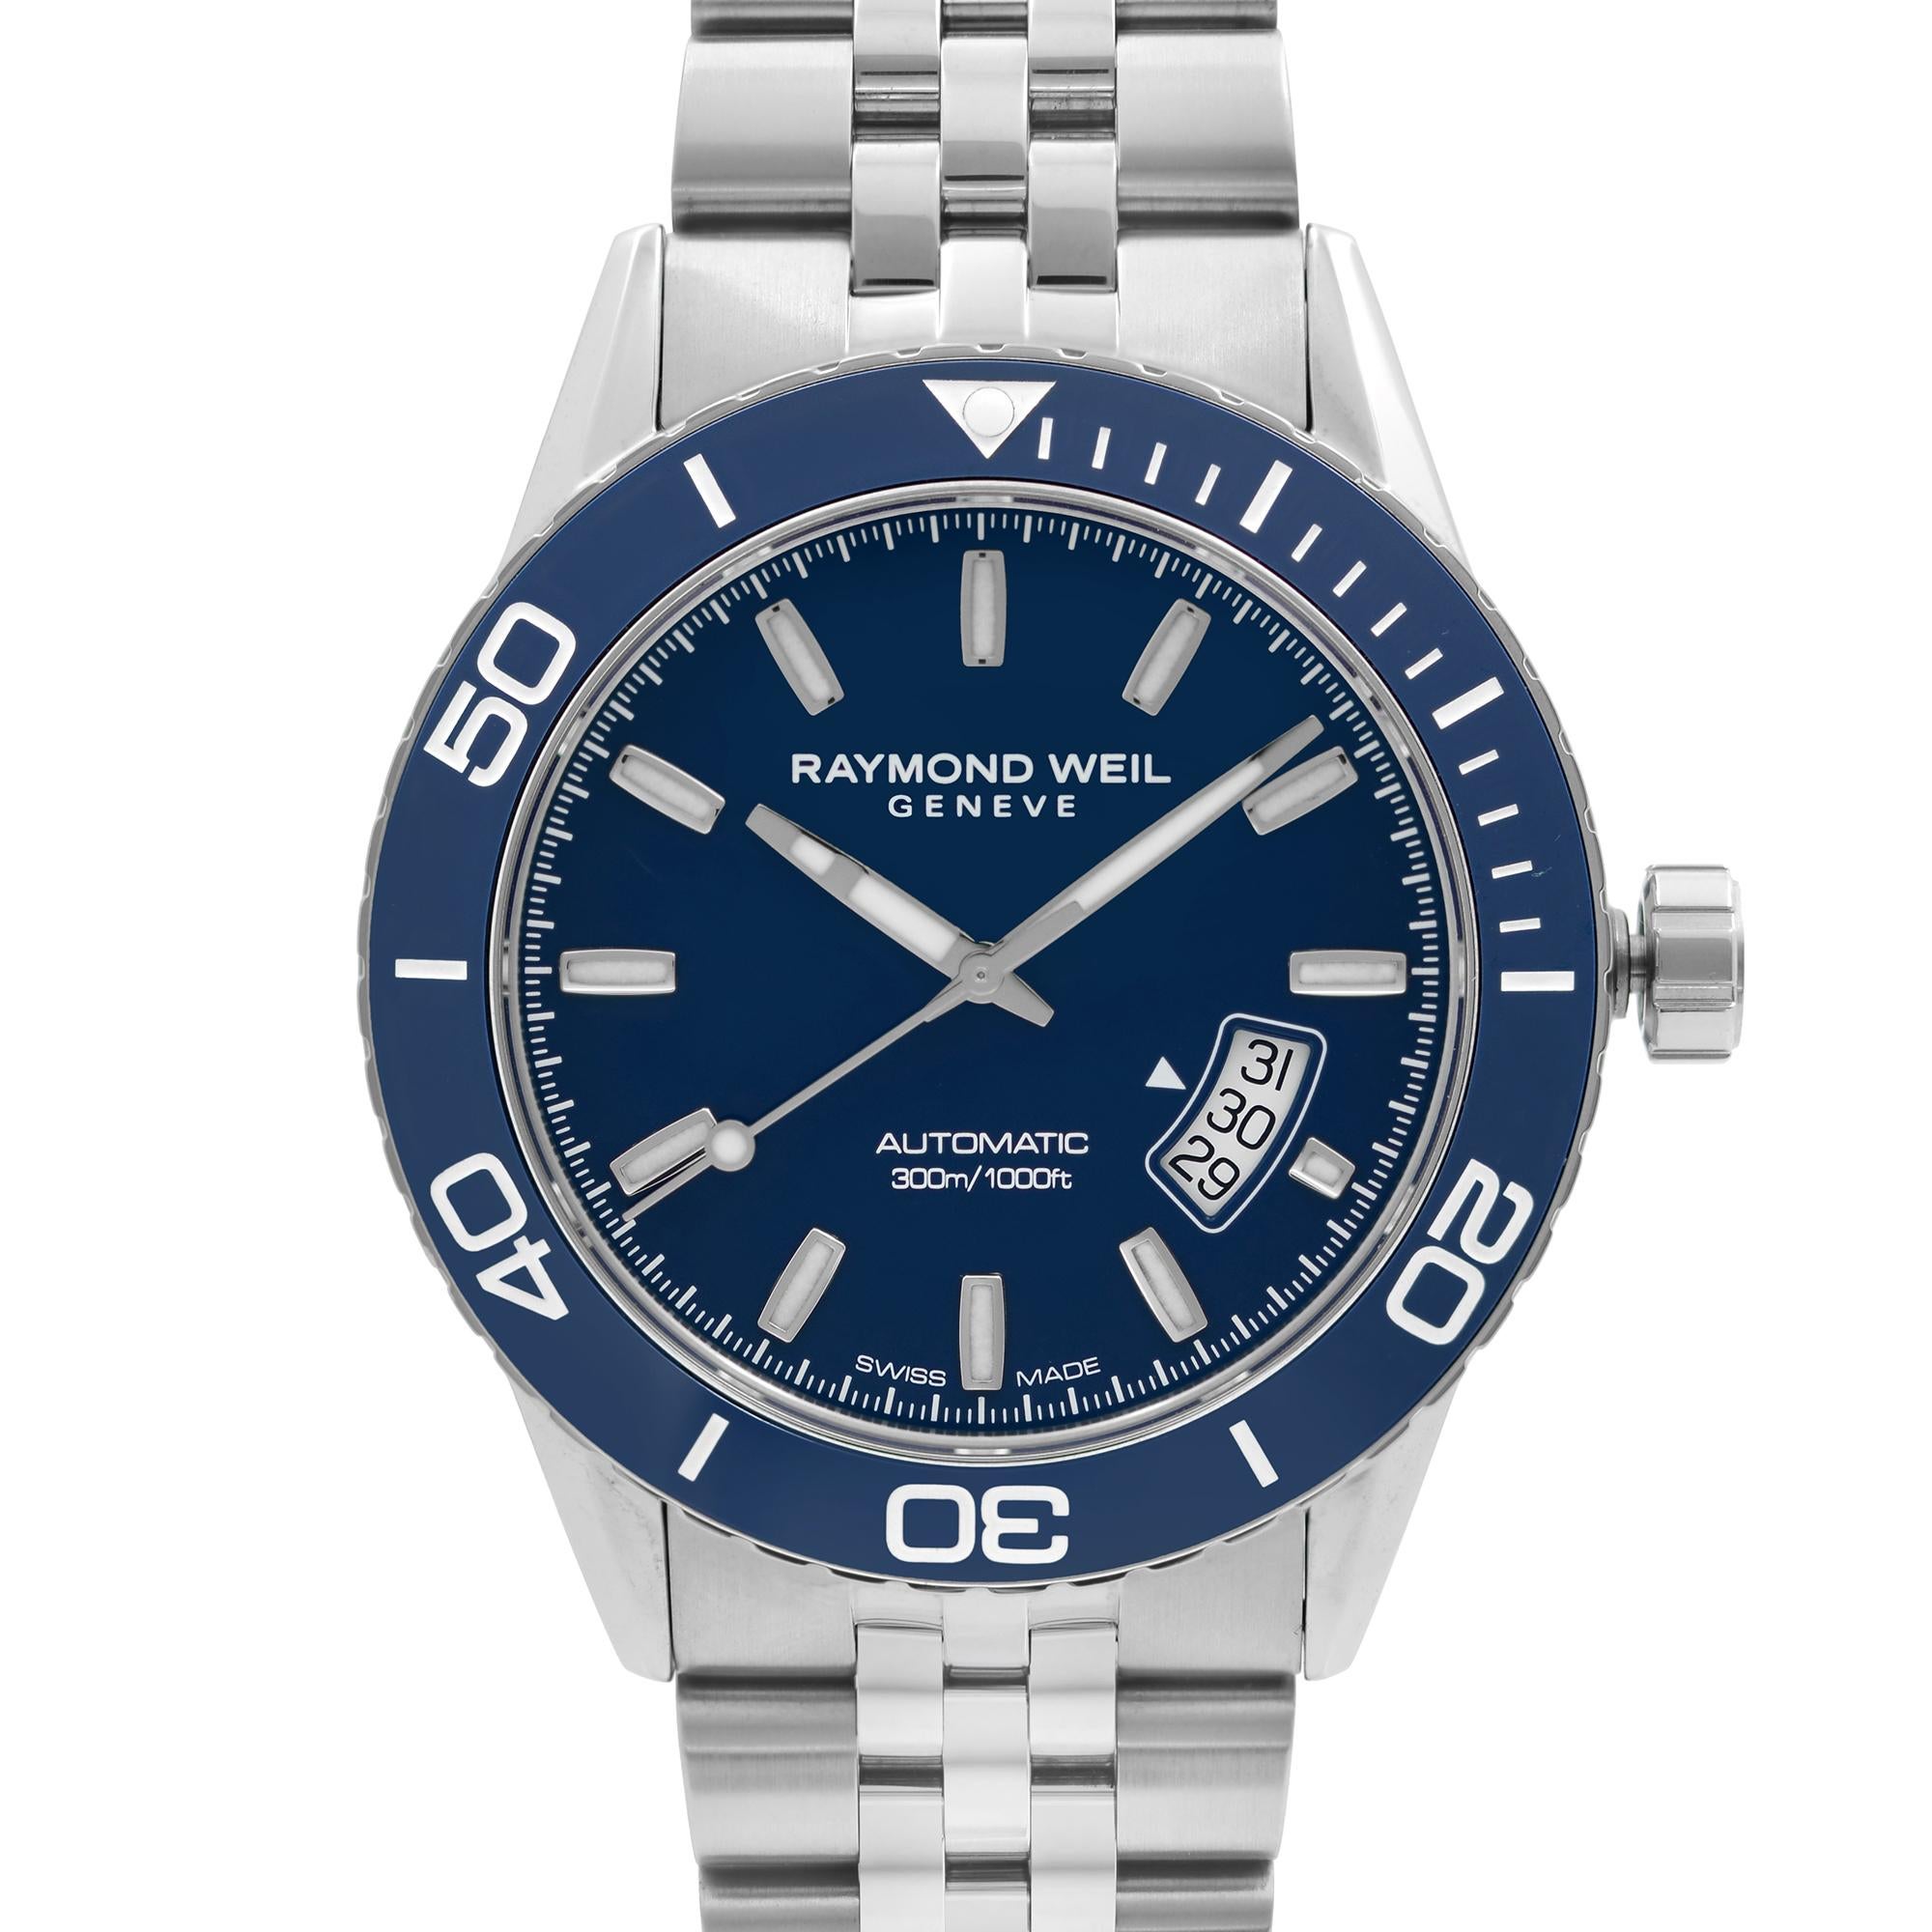 Never Worn Raymond Weil Freelancer Steel Ceramic Blue Dial Automatic Men's Watch 2760-ST3-50001. This Beautiful Timepiece Features: Stainless Steel Case and Bracelet, Uni-Directional Rotating Coin Edge Stainless Steel Bezel with a Blue Ceramic